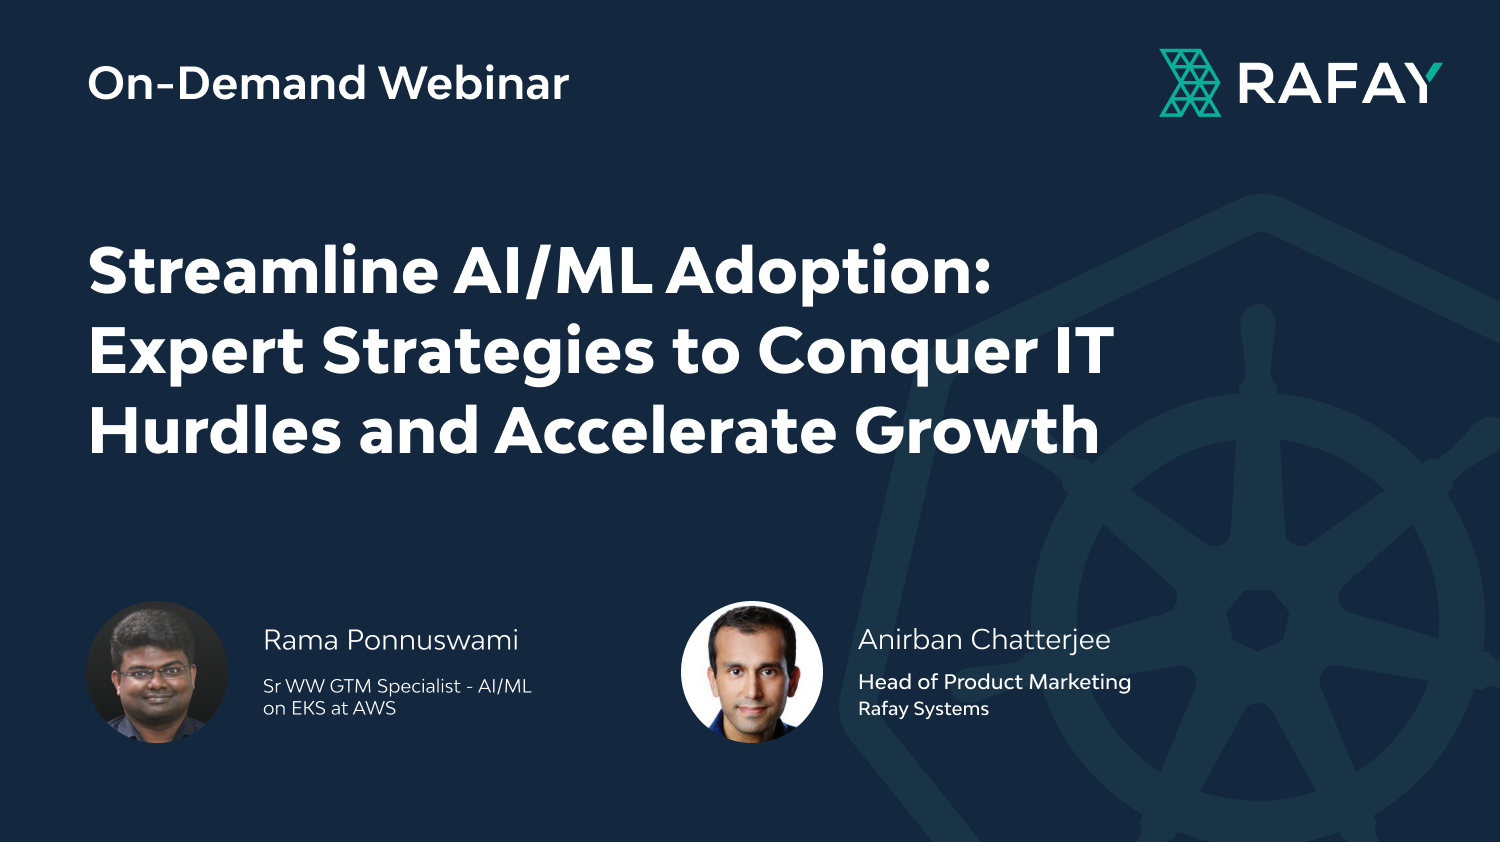 image for Streamline AI/ML Adoption: Expert Strategies to Conquer IT Hurdles and Accelerate Growth